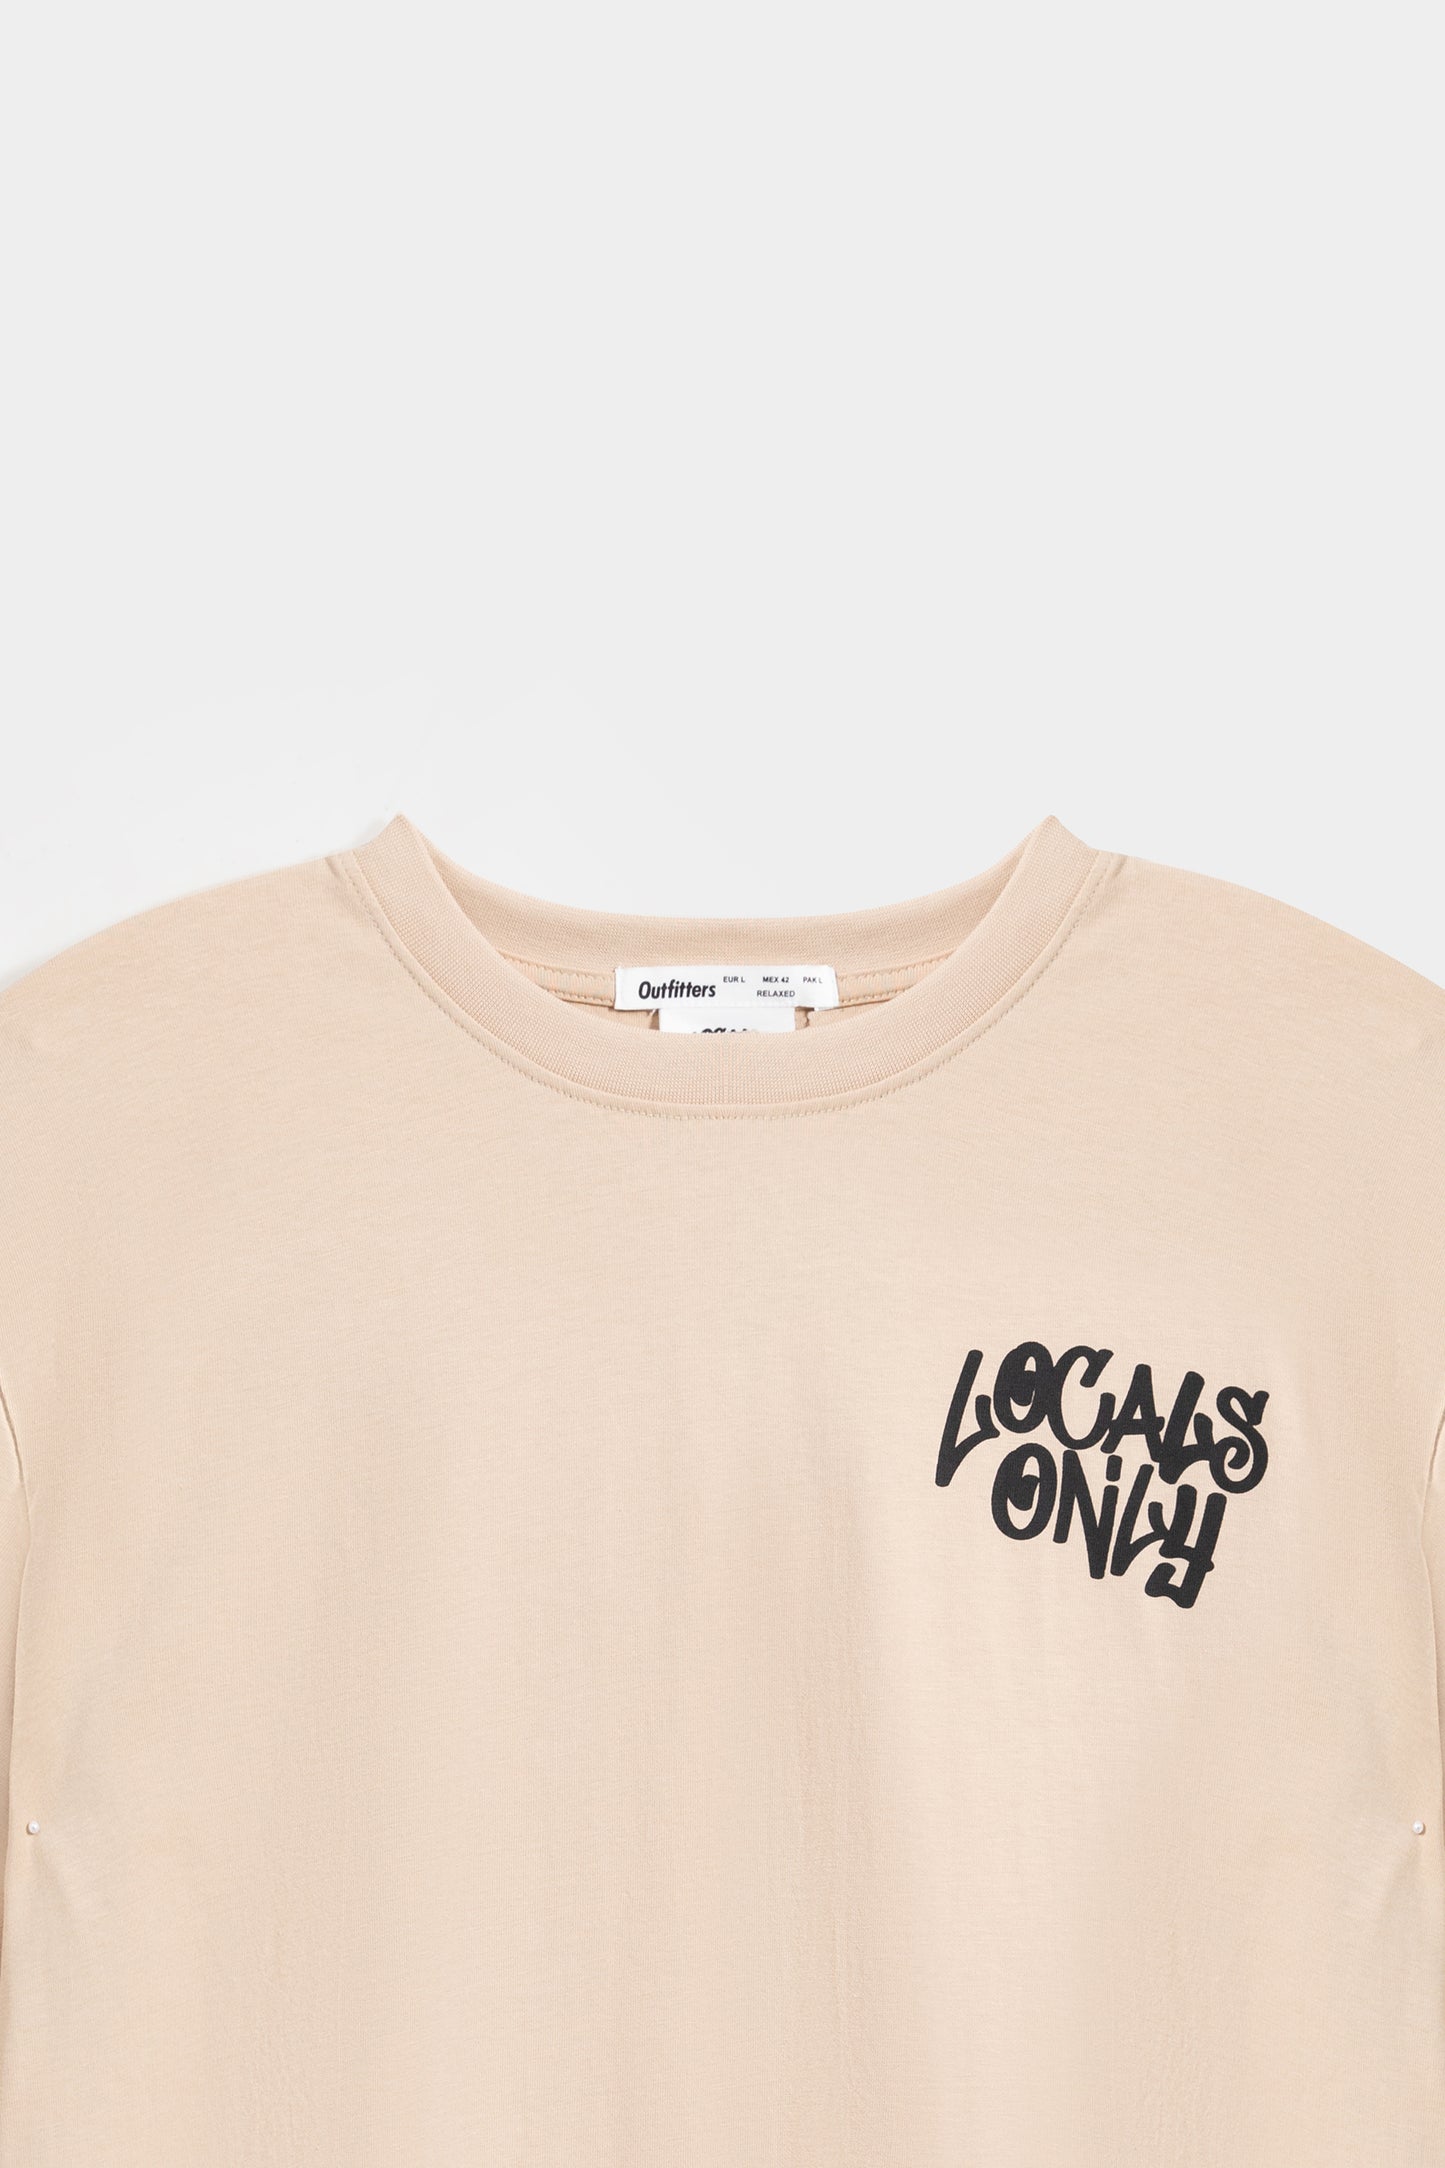 Locals Only Graphic T-Shirt